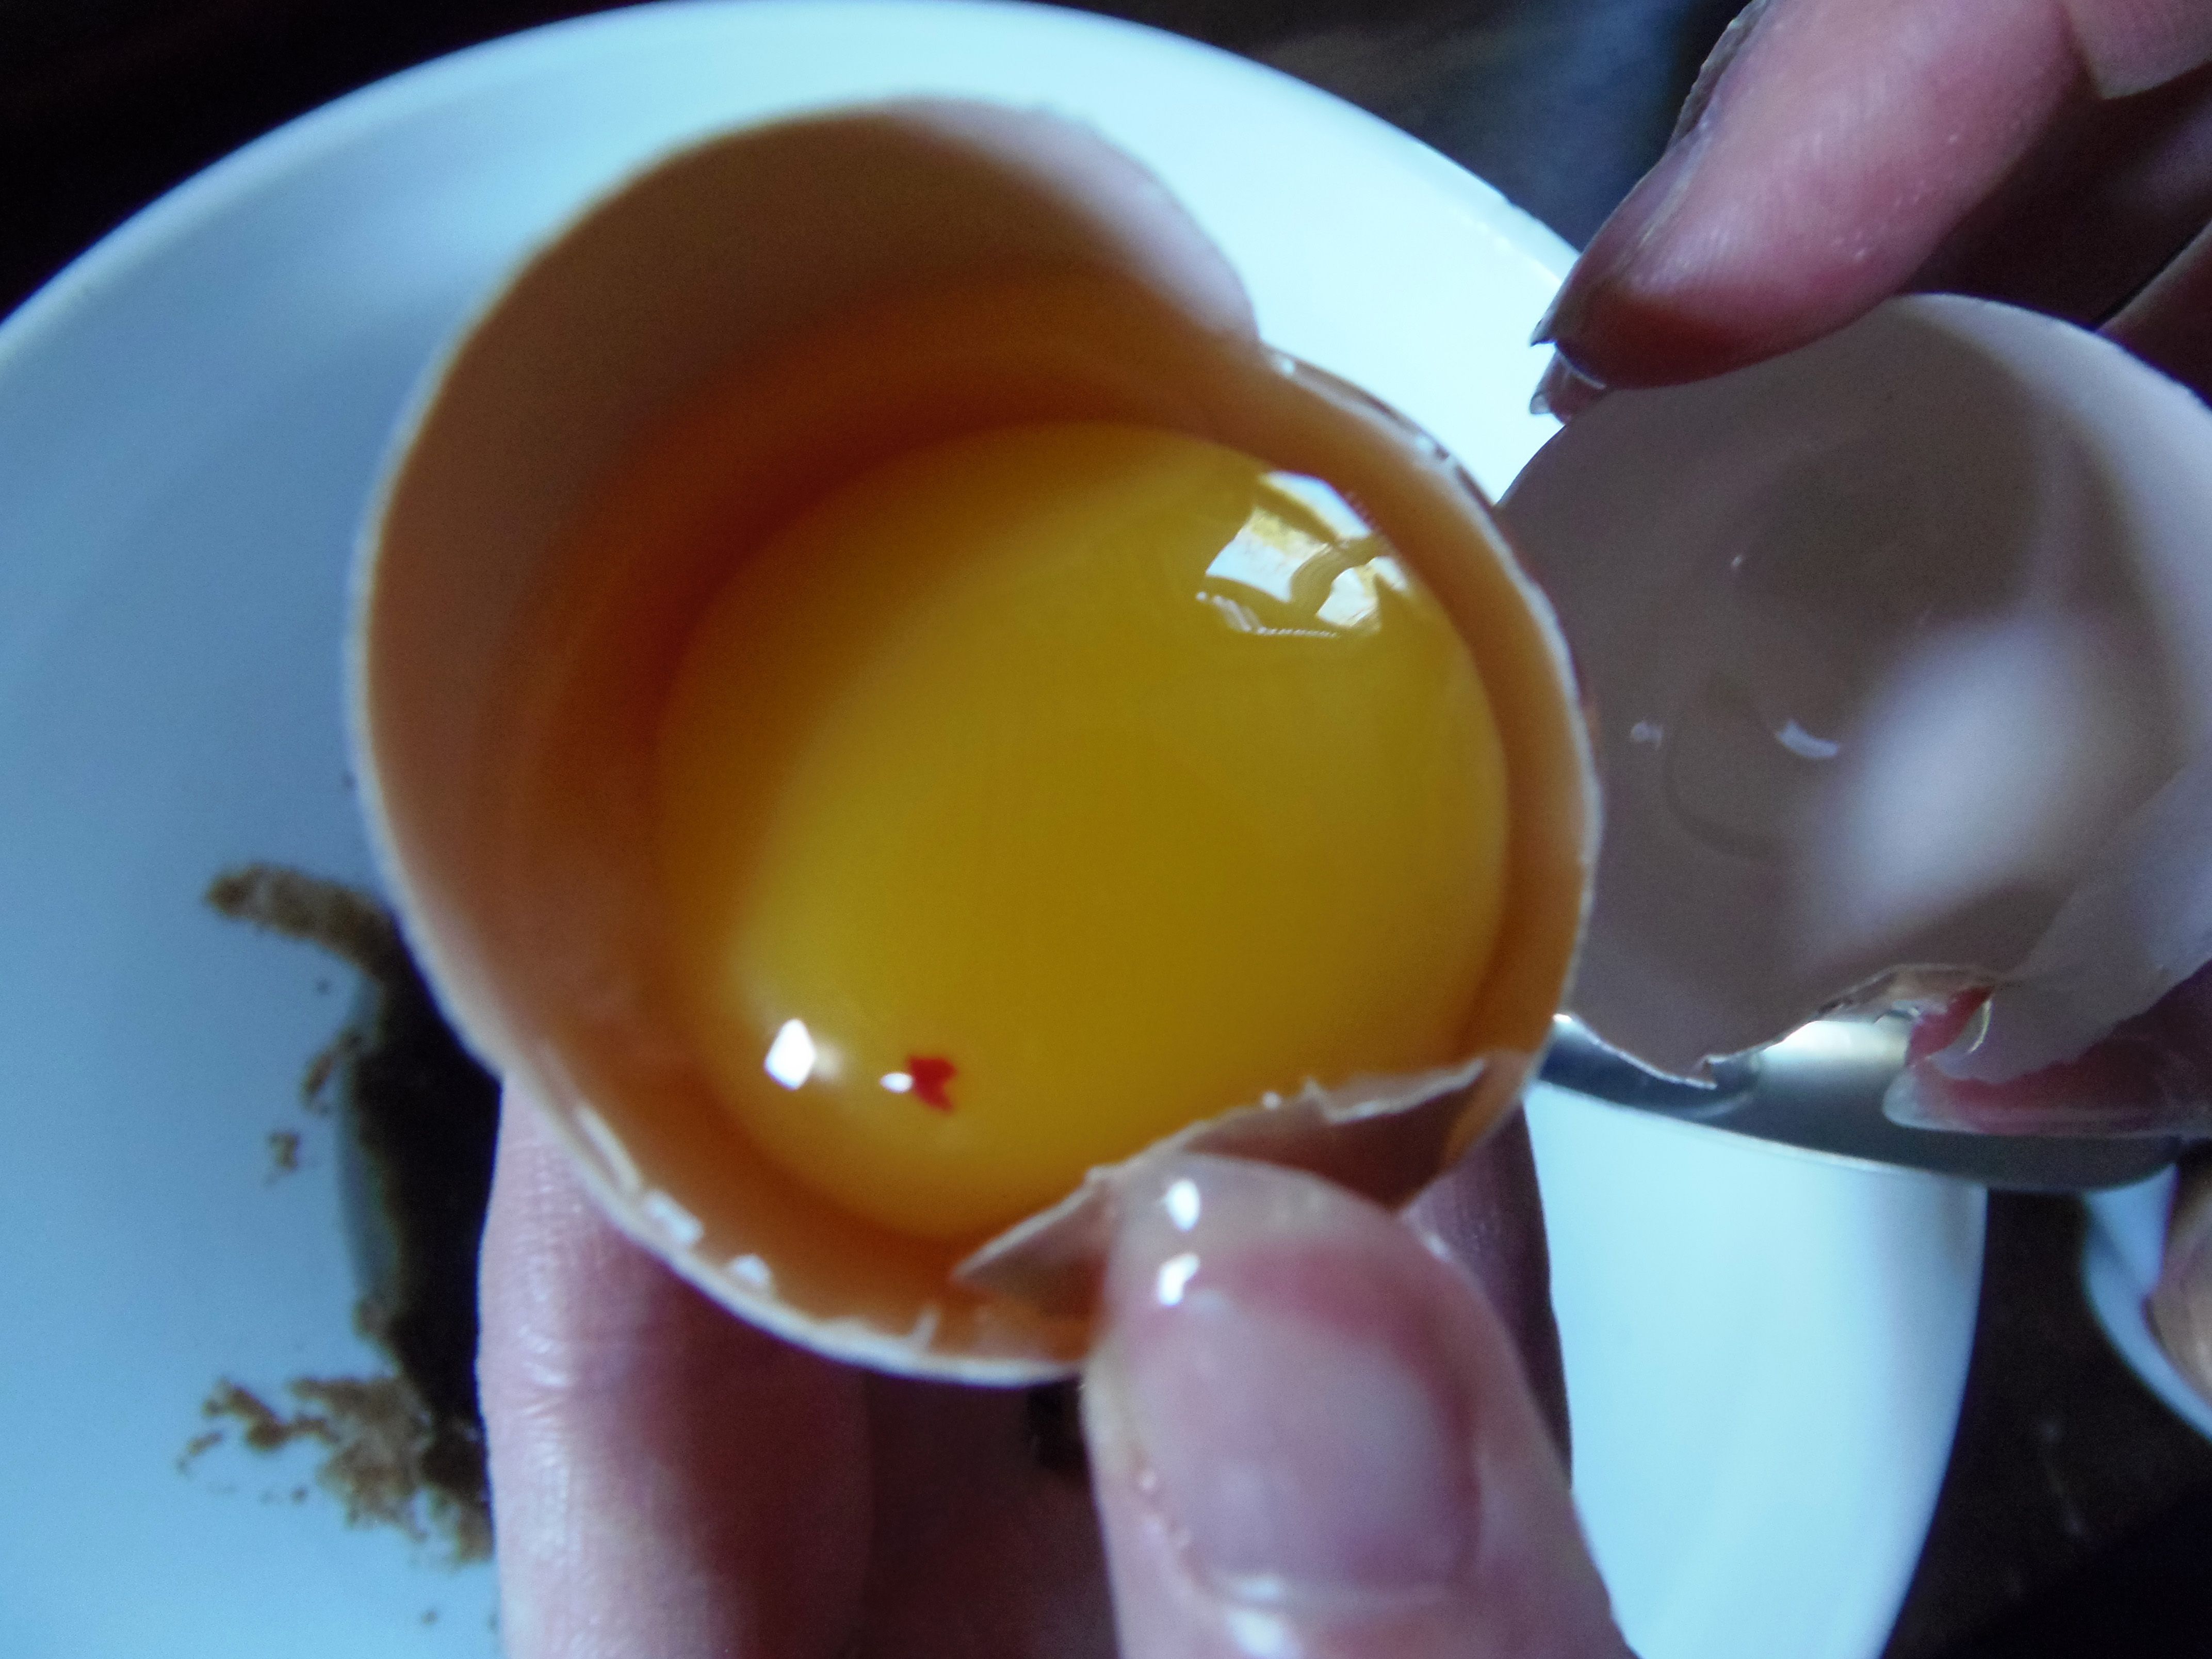 Is It Safe to Eat an Egg with a Blood Spot?